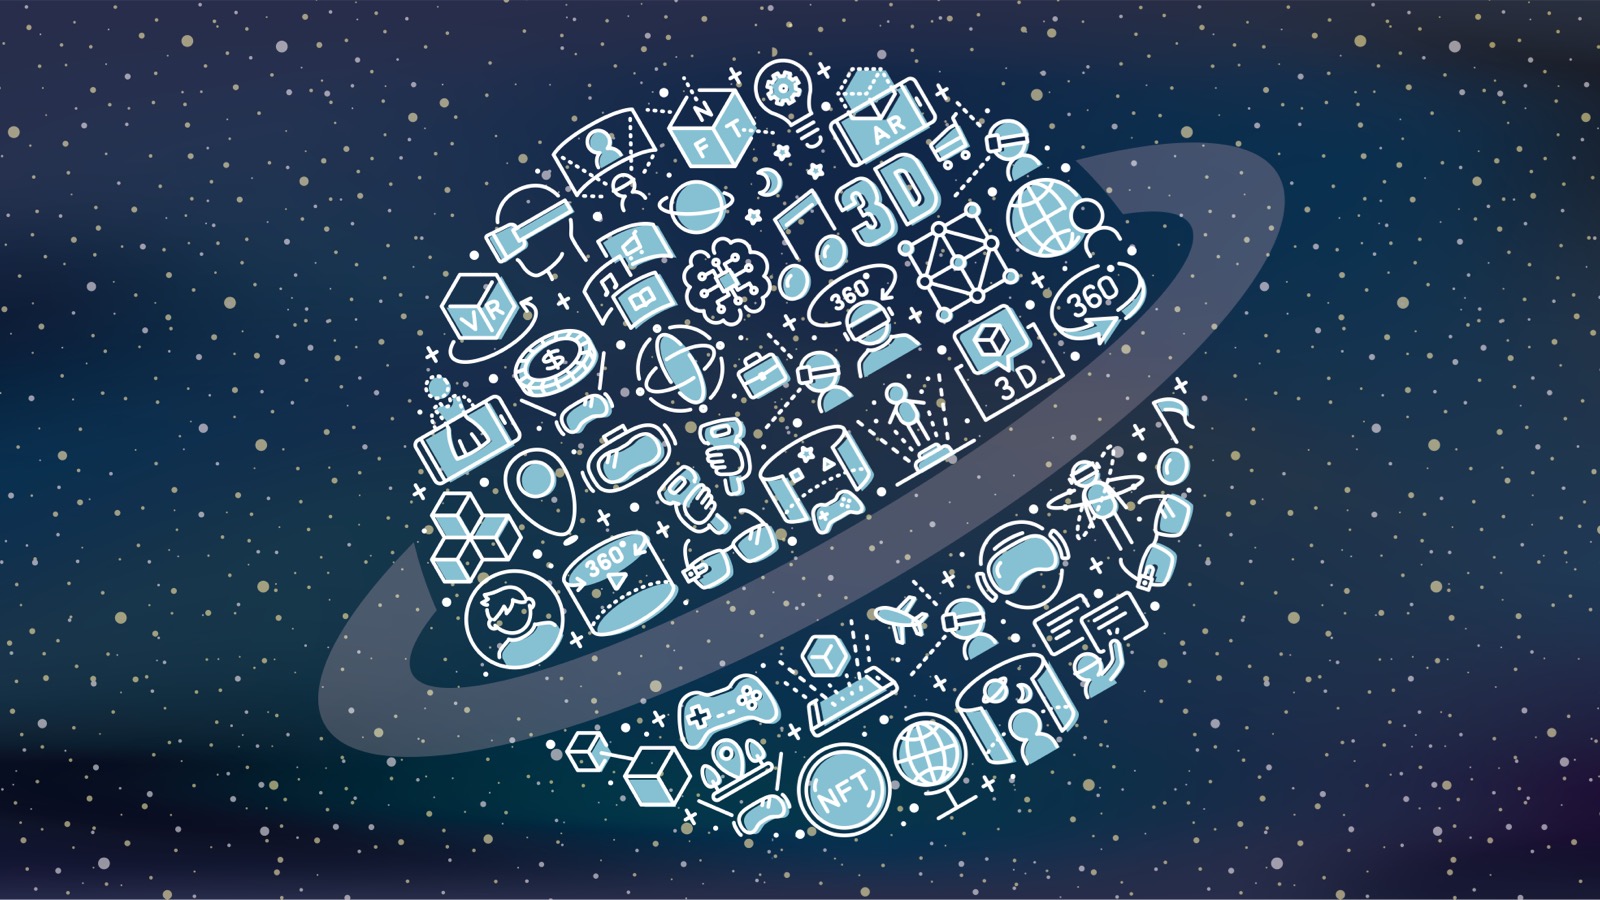 Blue metaverse with icons in the shape of a planet.